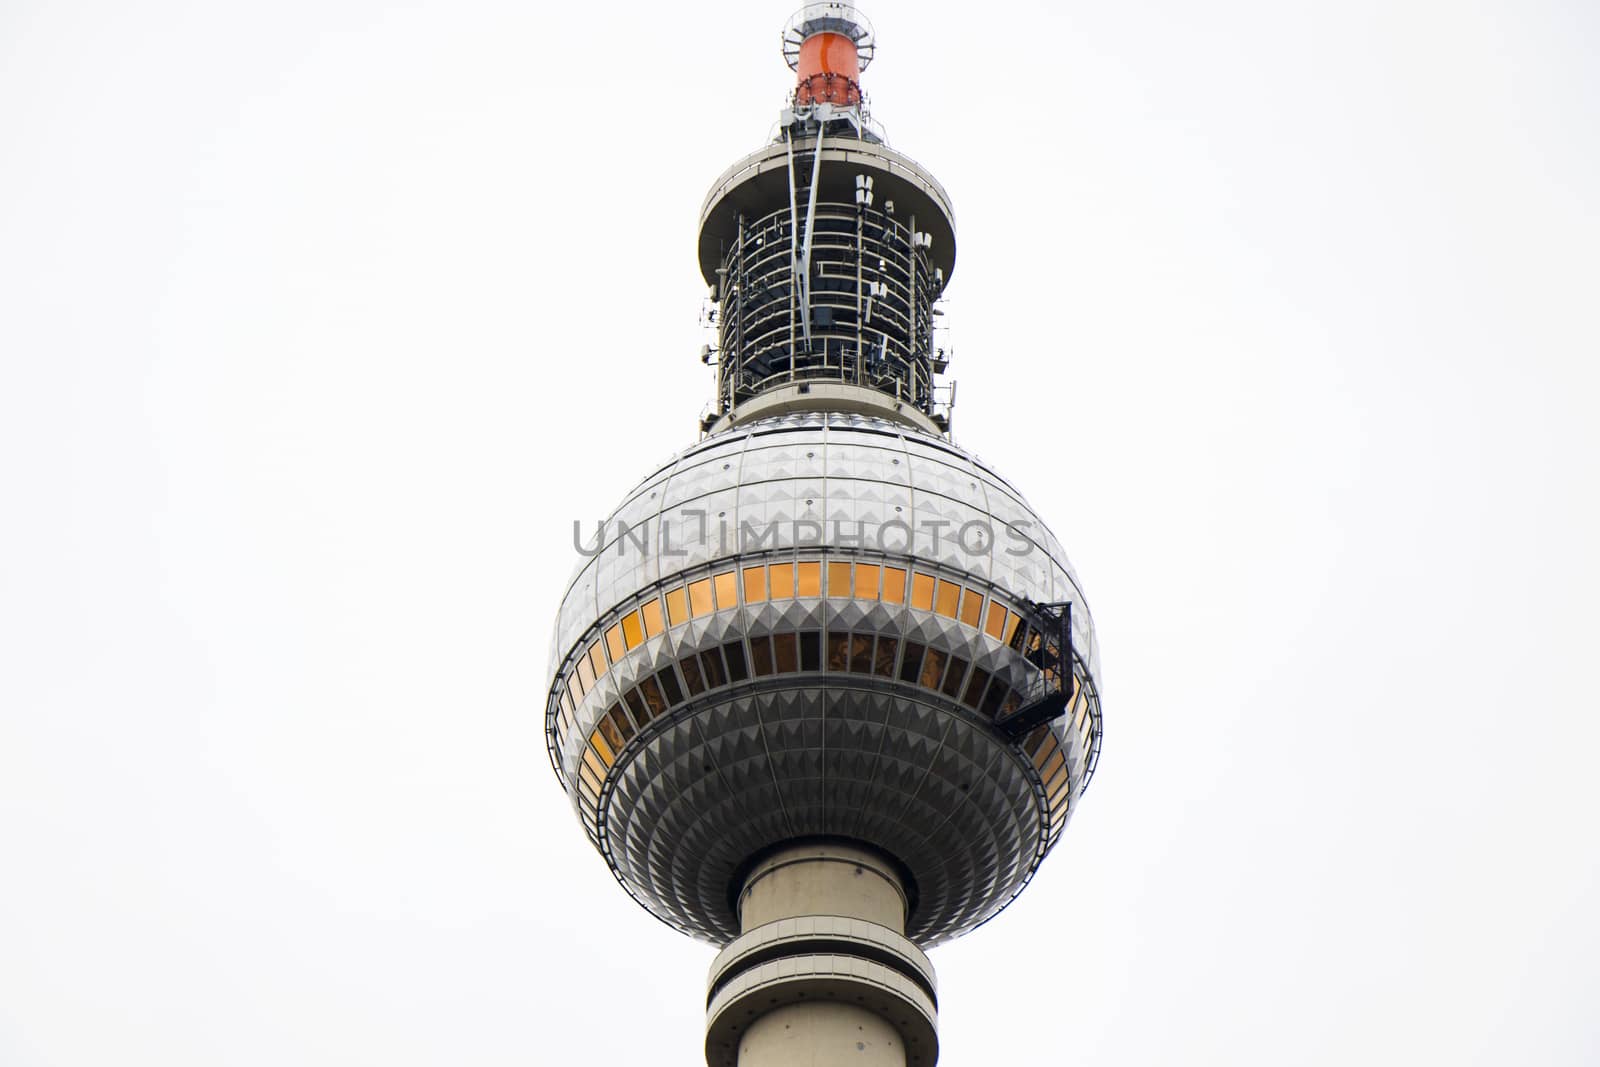 TV tower famous landmark and architecture in Berlin, Germany, white sky.